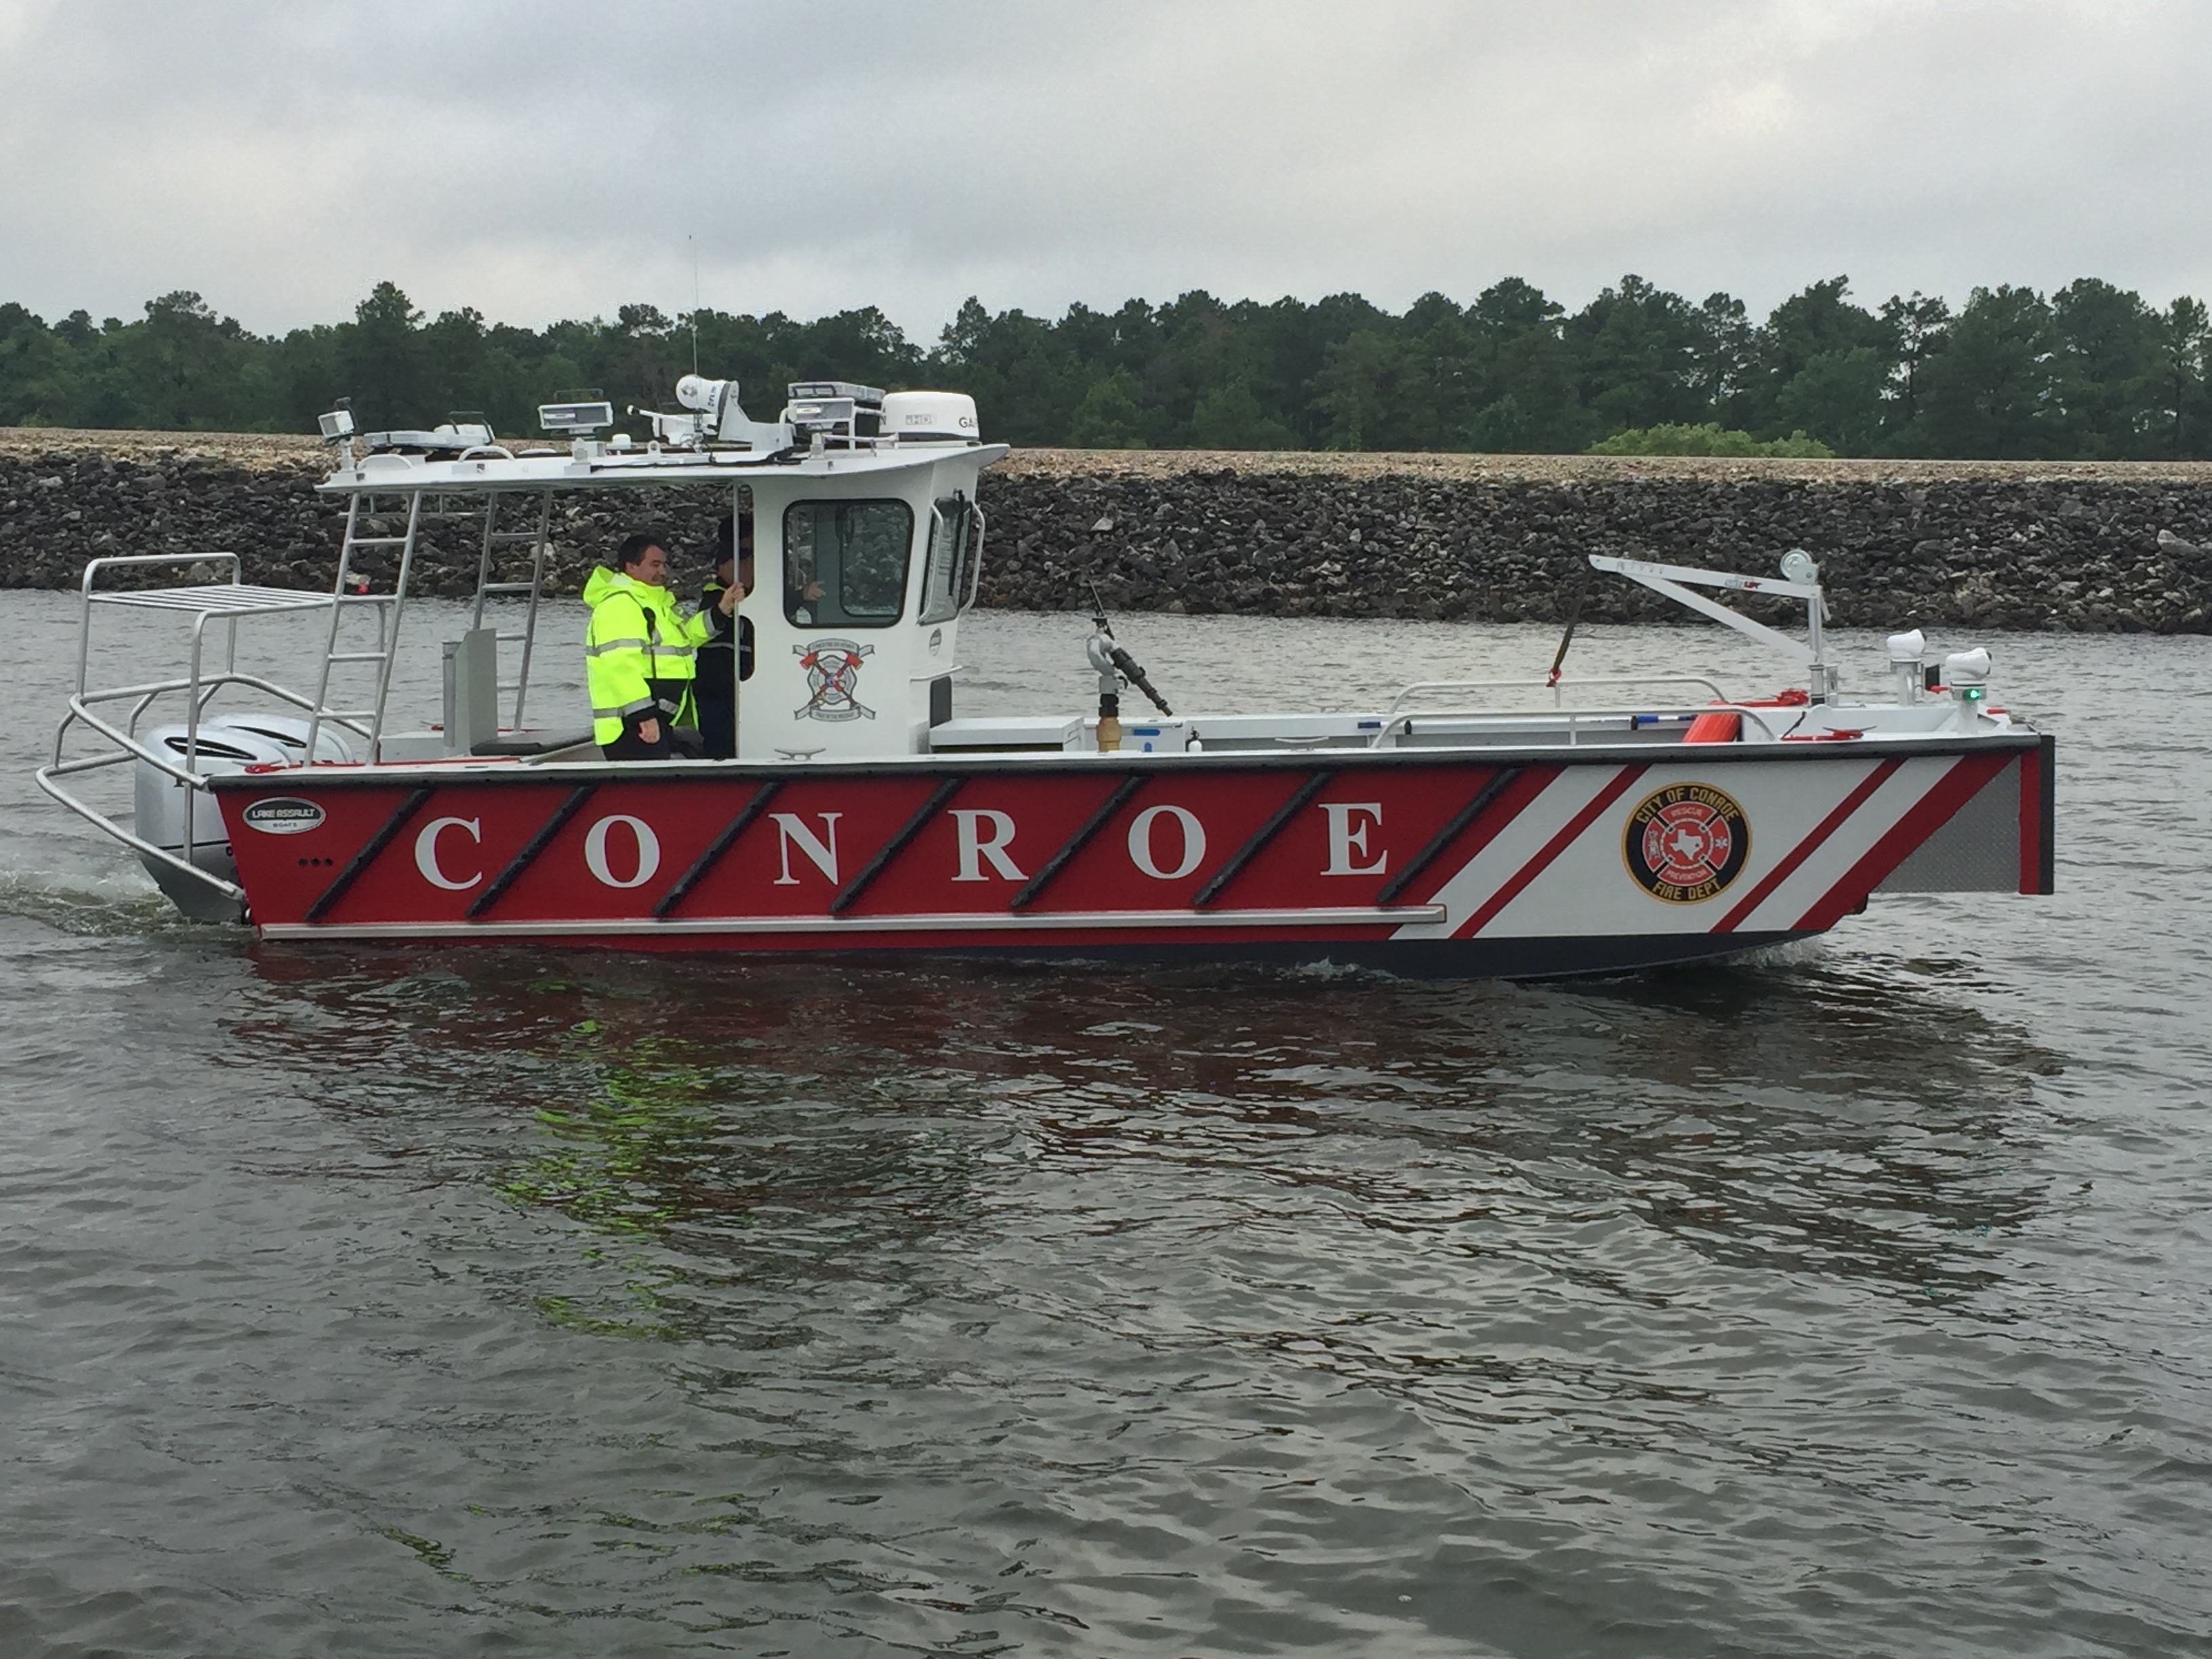 Fire Boat-City of Conroe-LakeAssault